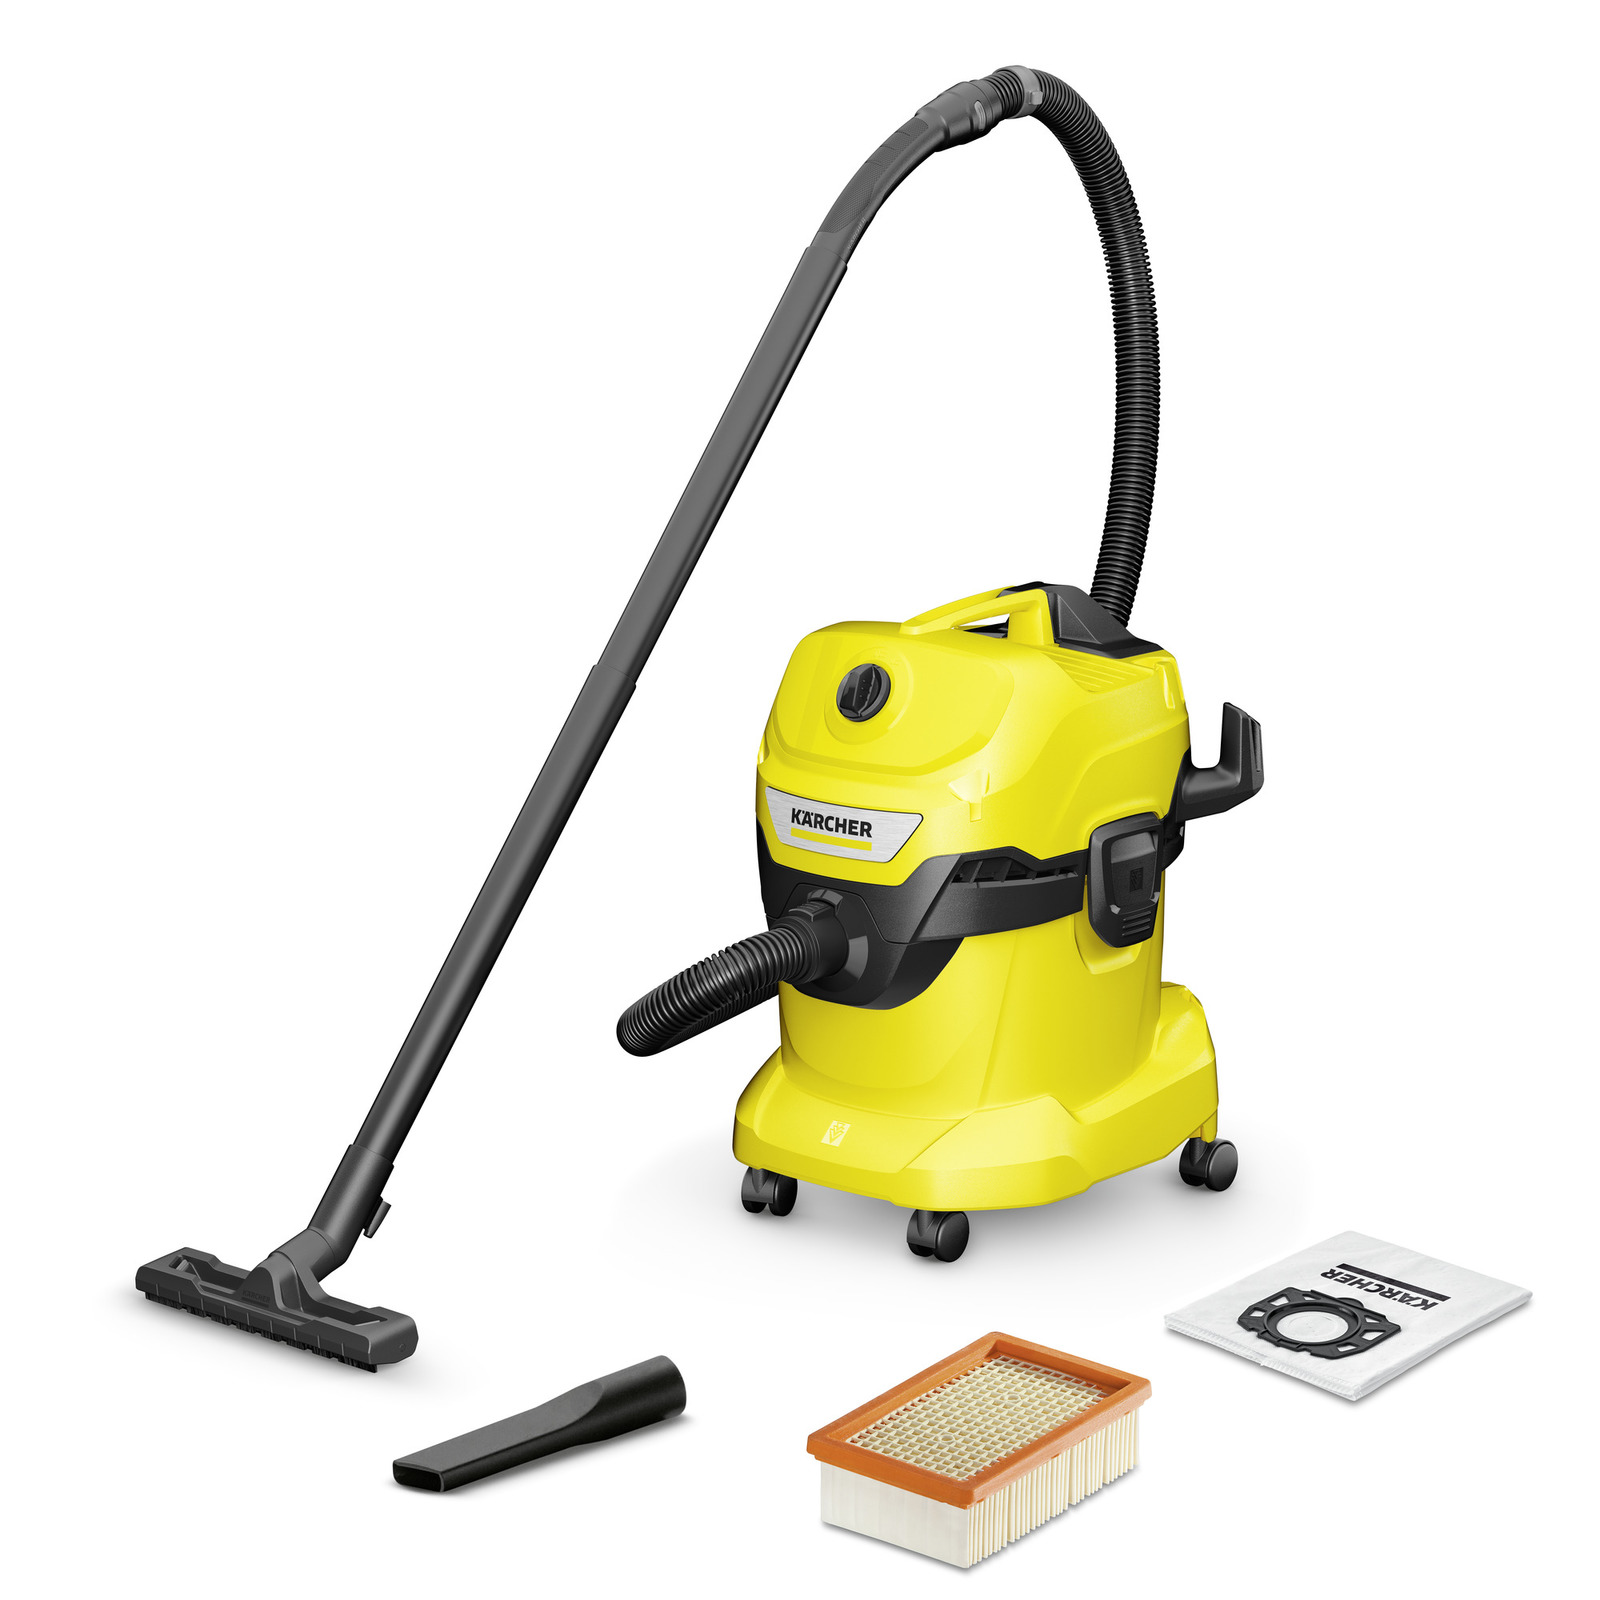 Cleaning Equipment for Home & Industrial Applications